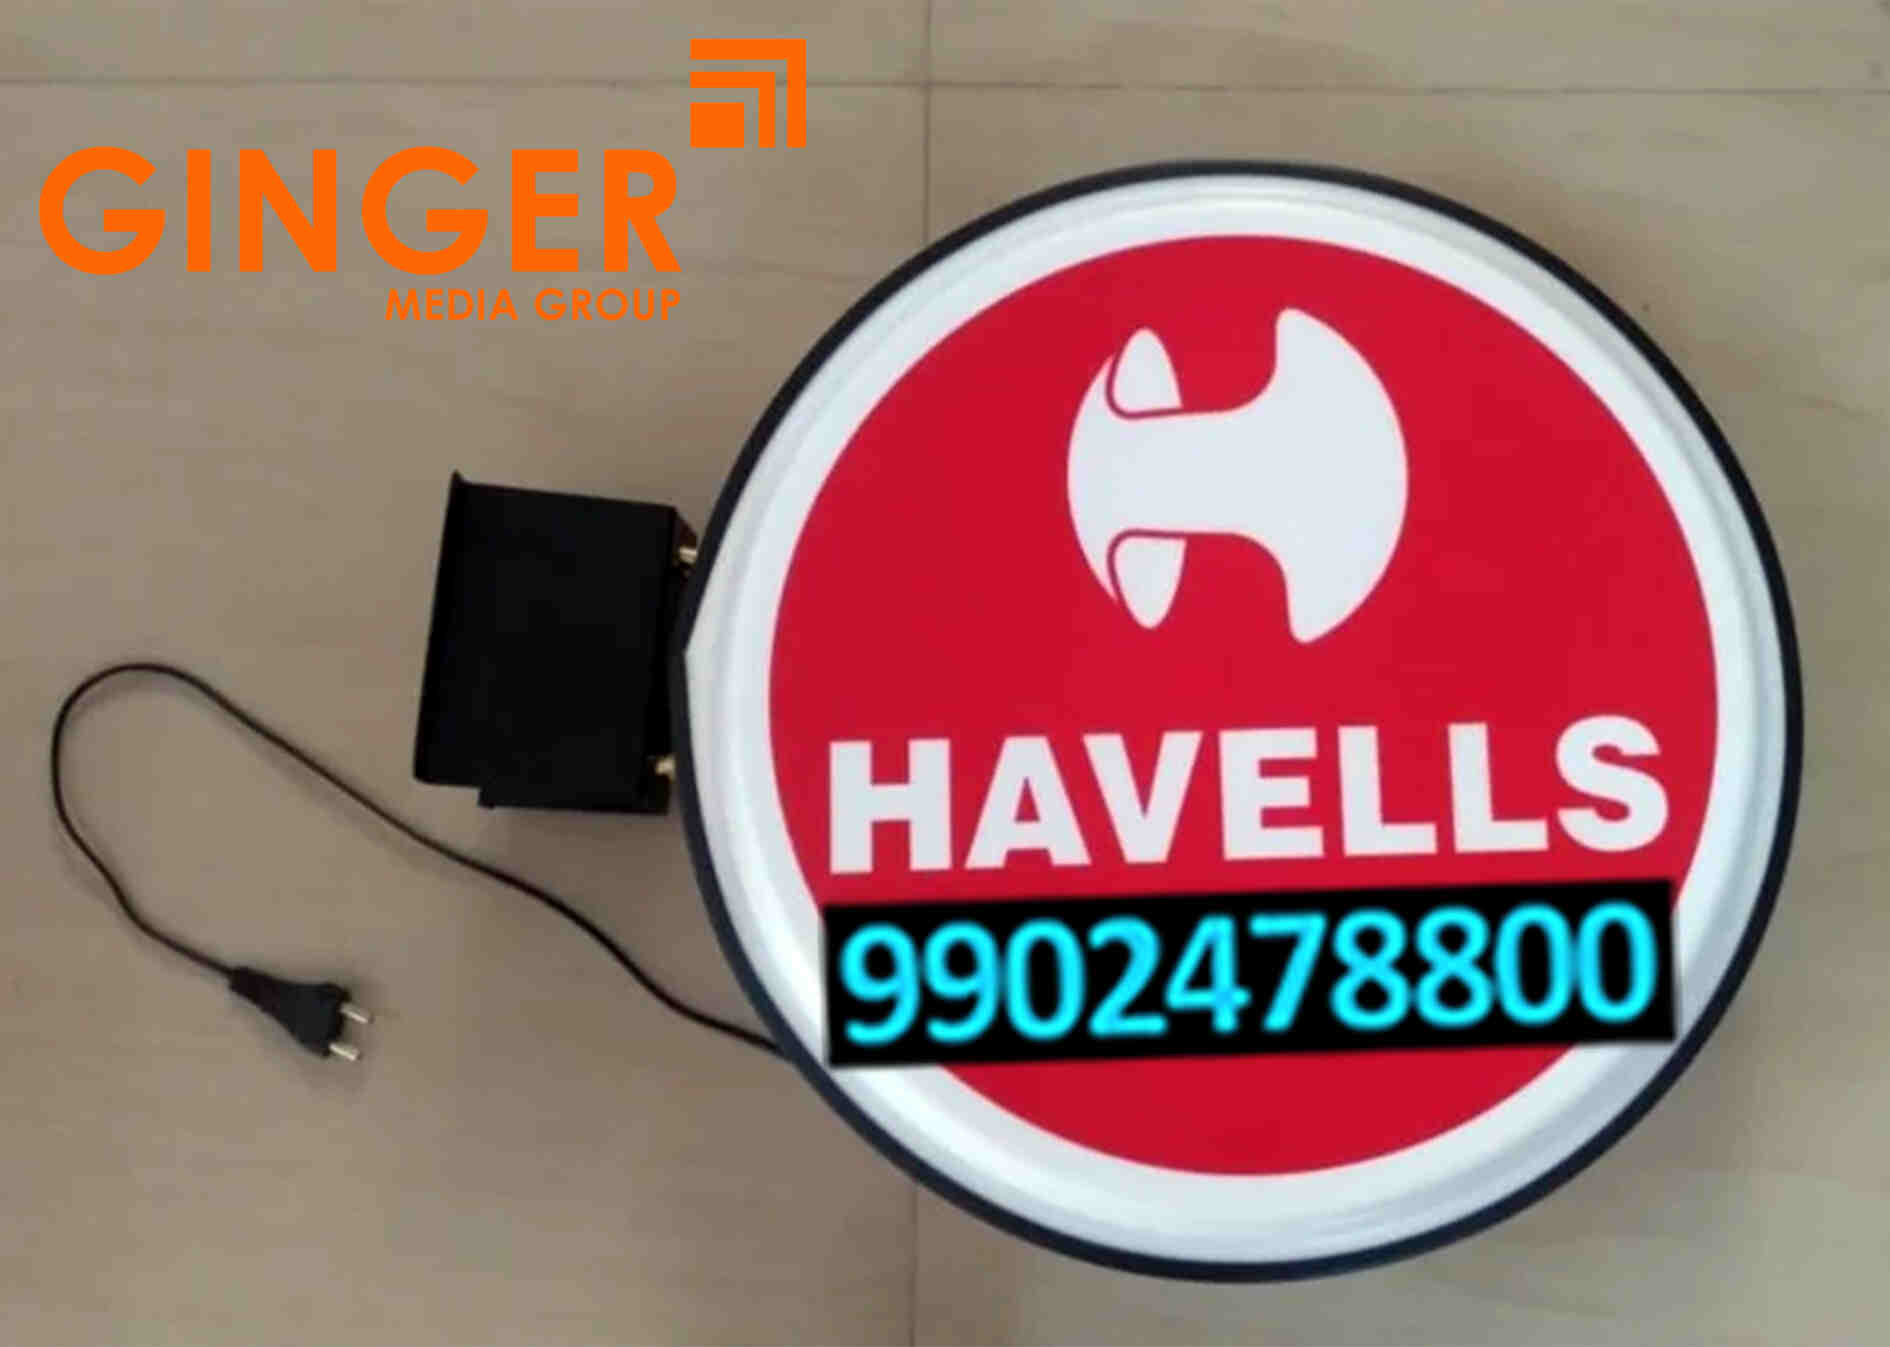 Flanges branding in India for Havells